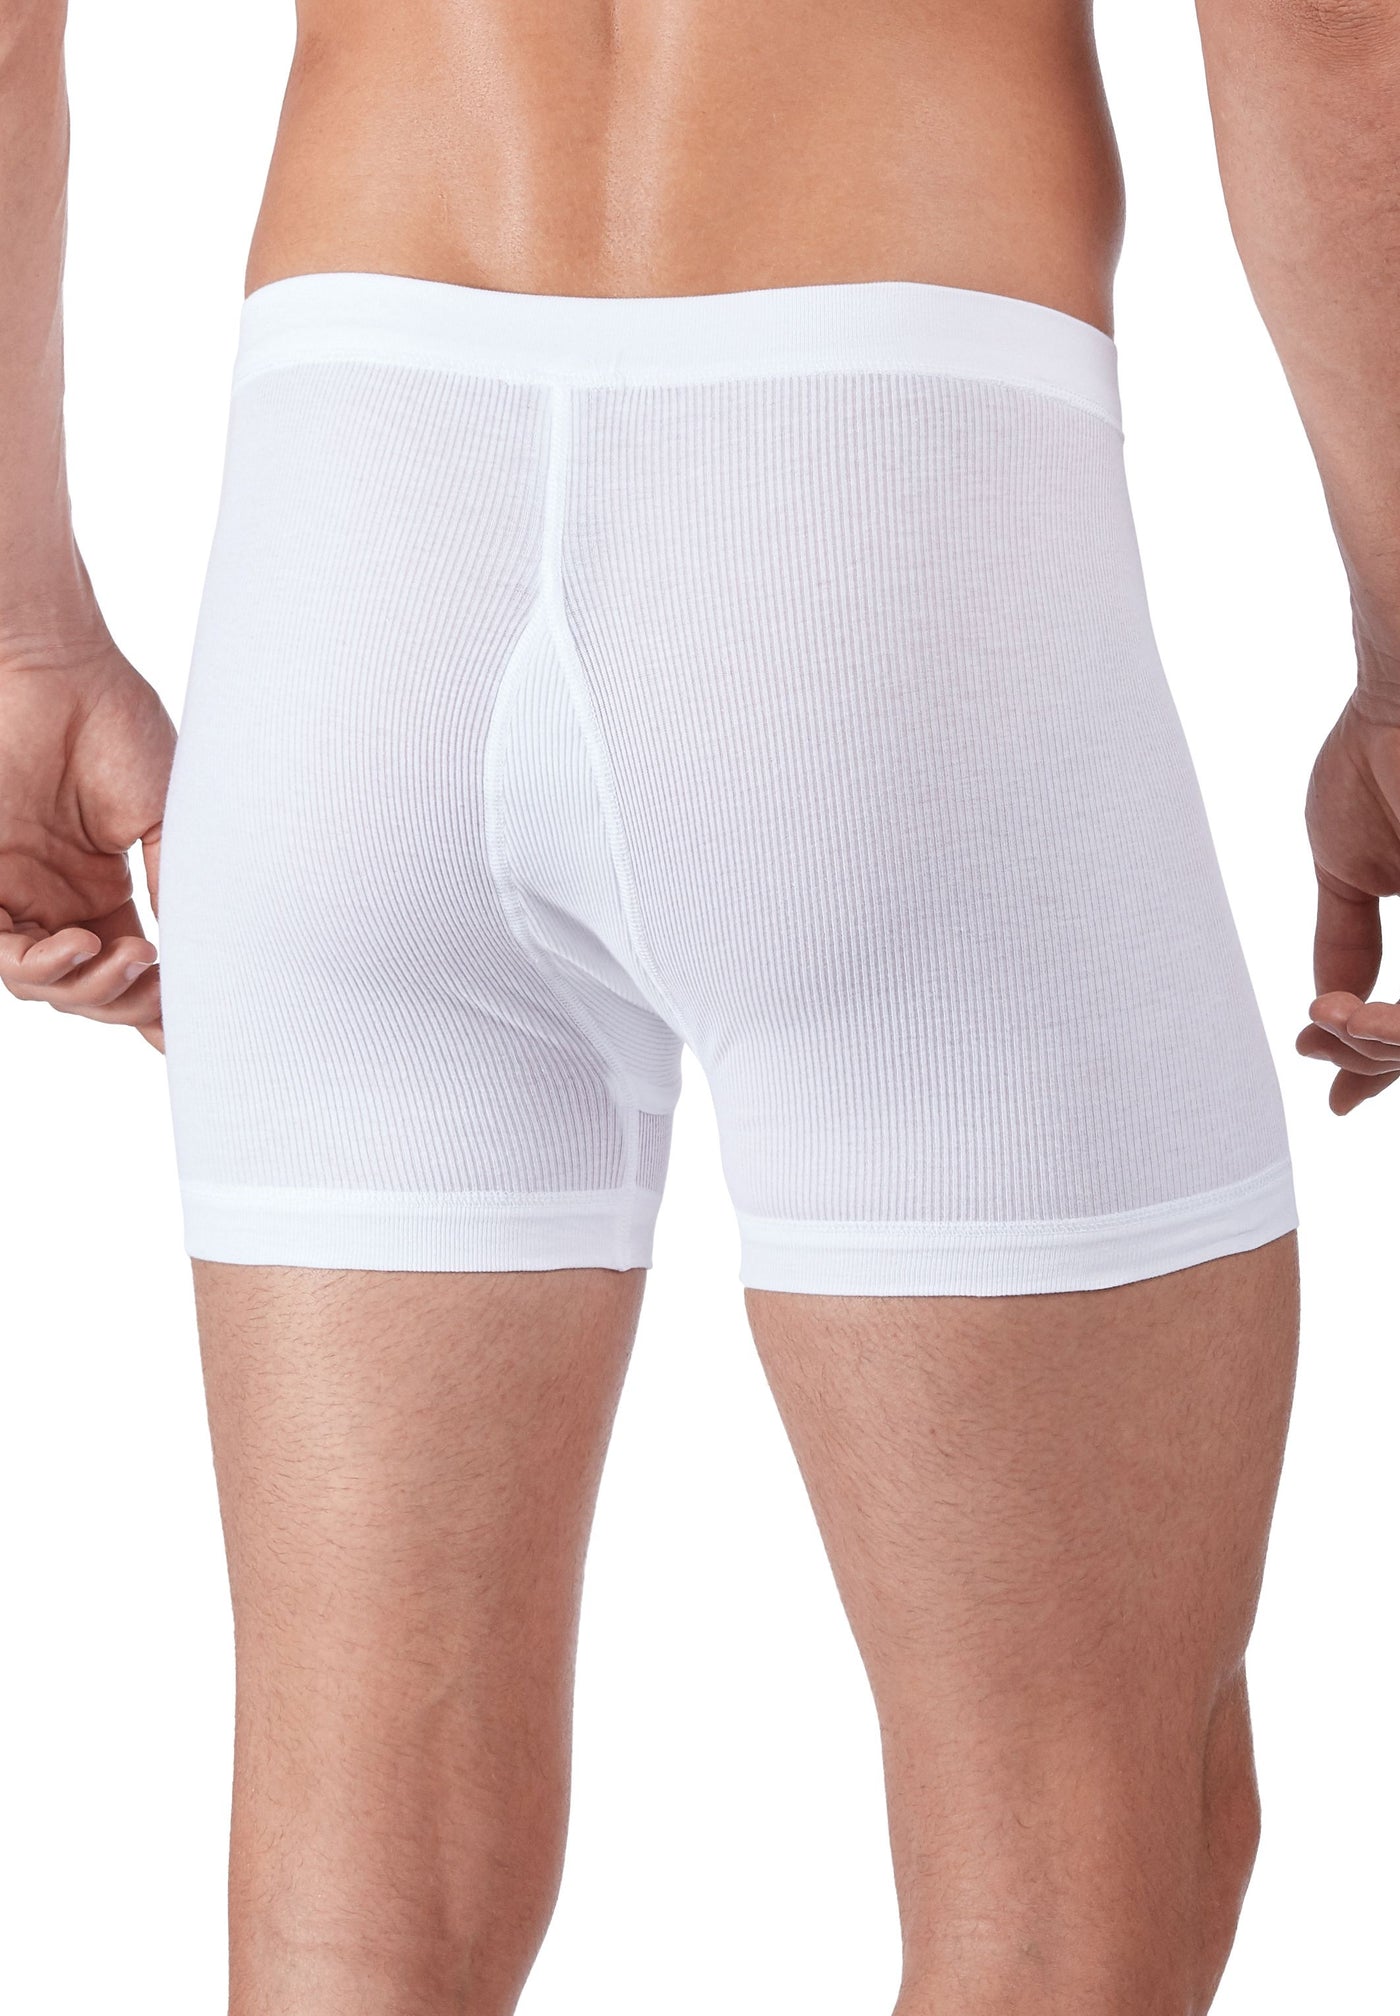 HUBER hautnah - Cotton Double Rib - Boxer Briefs with fly